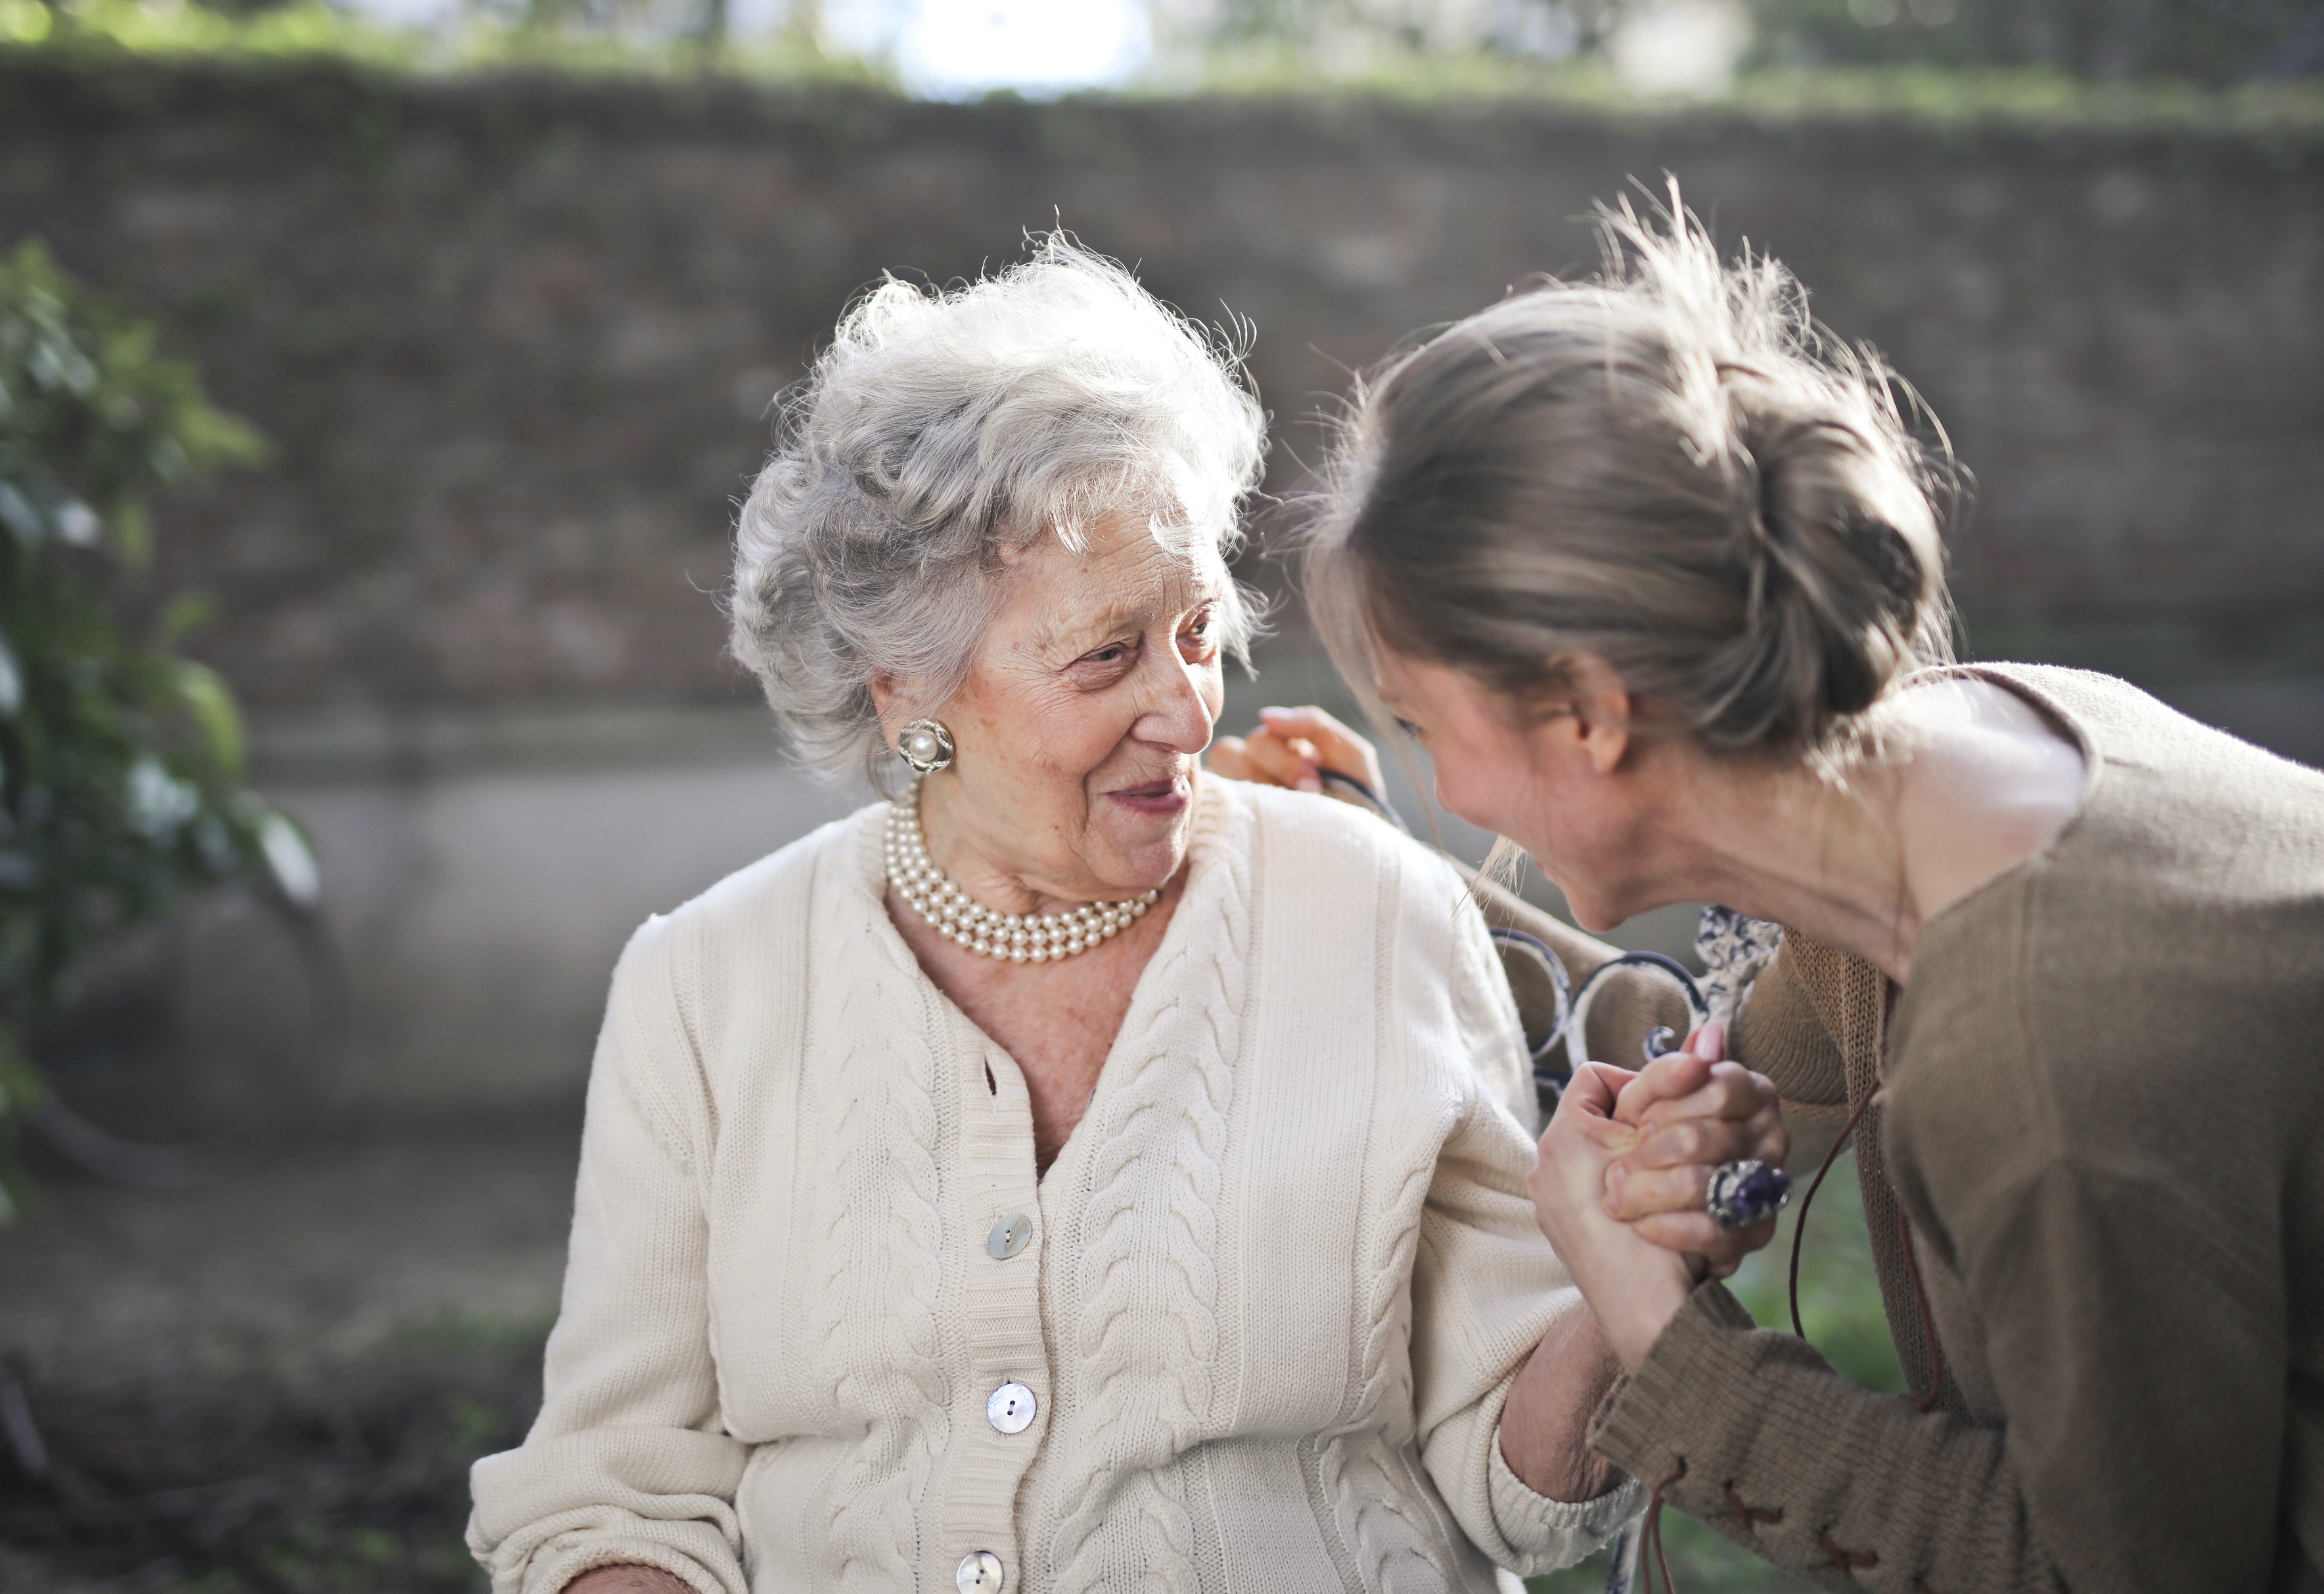 Older Woman Speaking with a Younger Woman Kneeling Beside Her